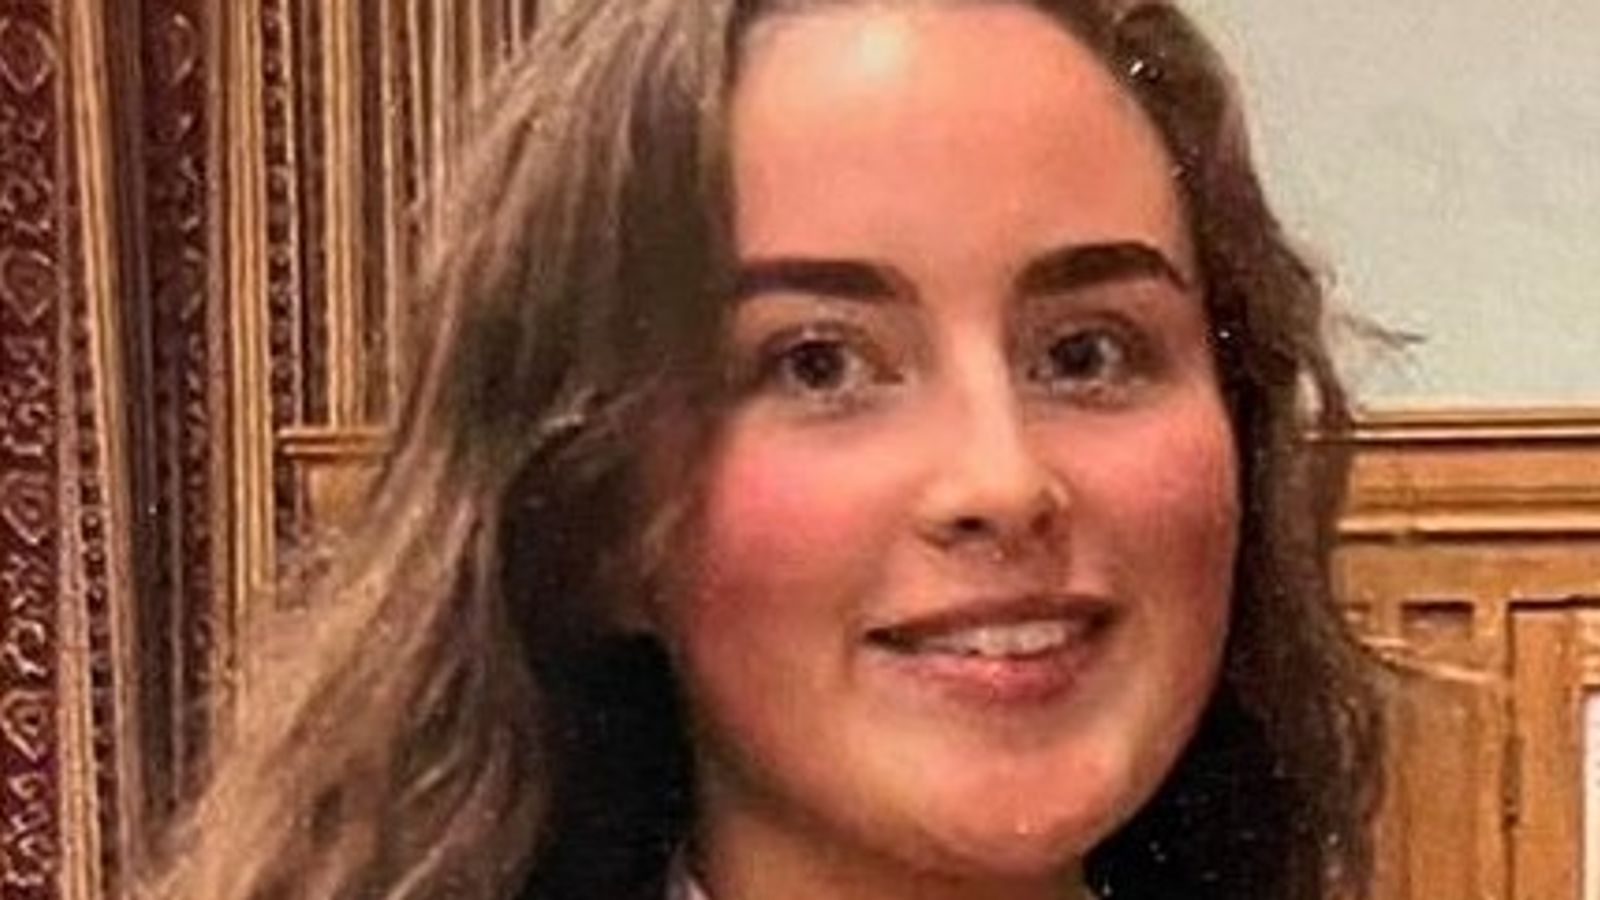 Student died after taking ketamine - now her mother wants to address  'naivety' among parents, UK News